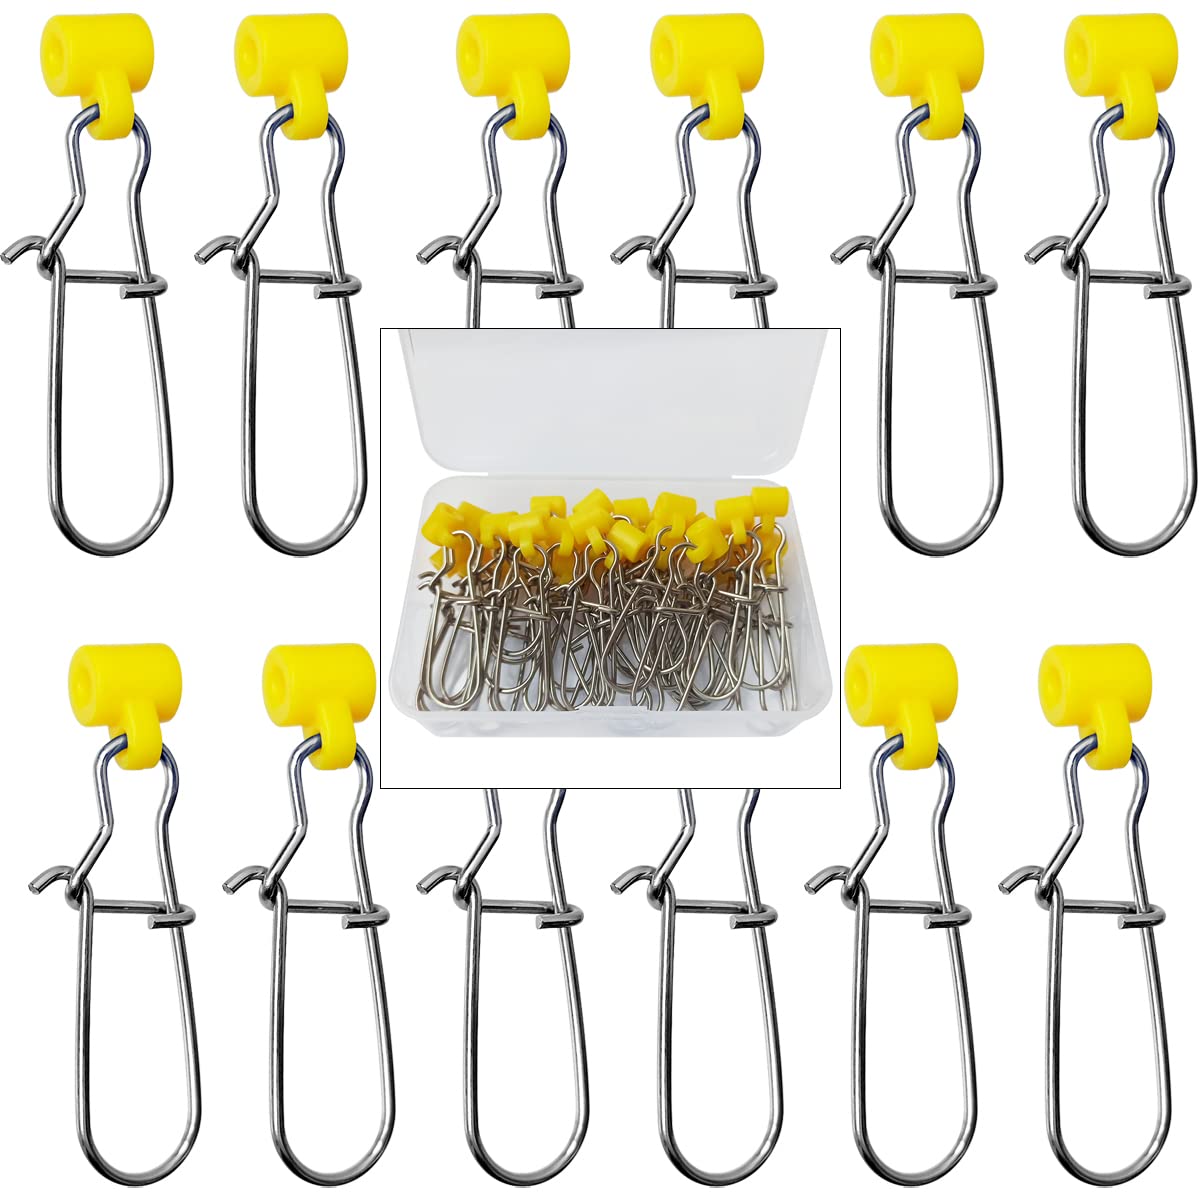 40Pcs Stainless Steel Fishing Line Sinker Slides Catfishing Rig with Duo  Lock Snaps Heavy Duty Sinker Slider Swivel Snap Kit for Fishing Tackle  Yellow